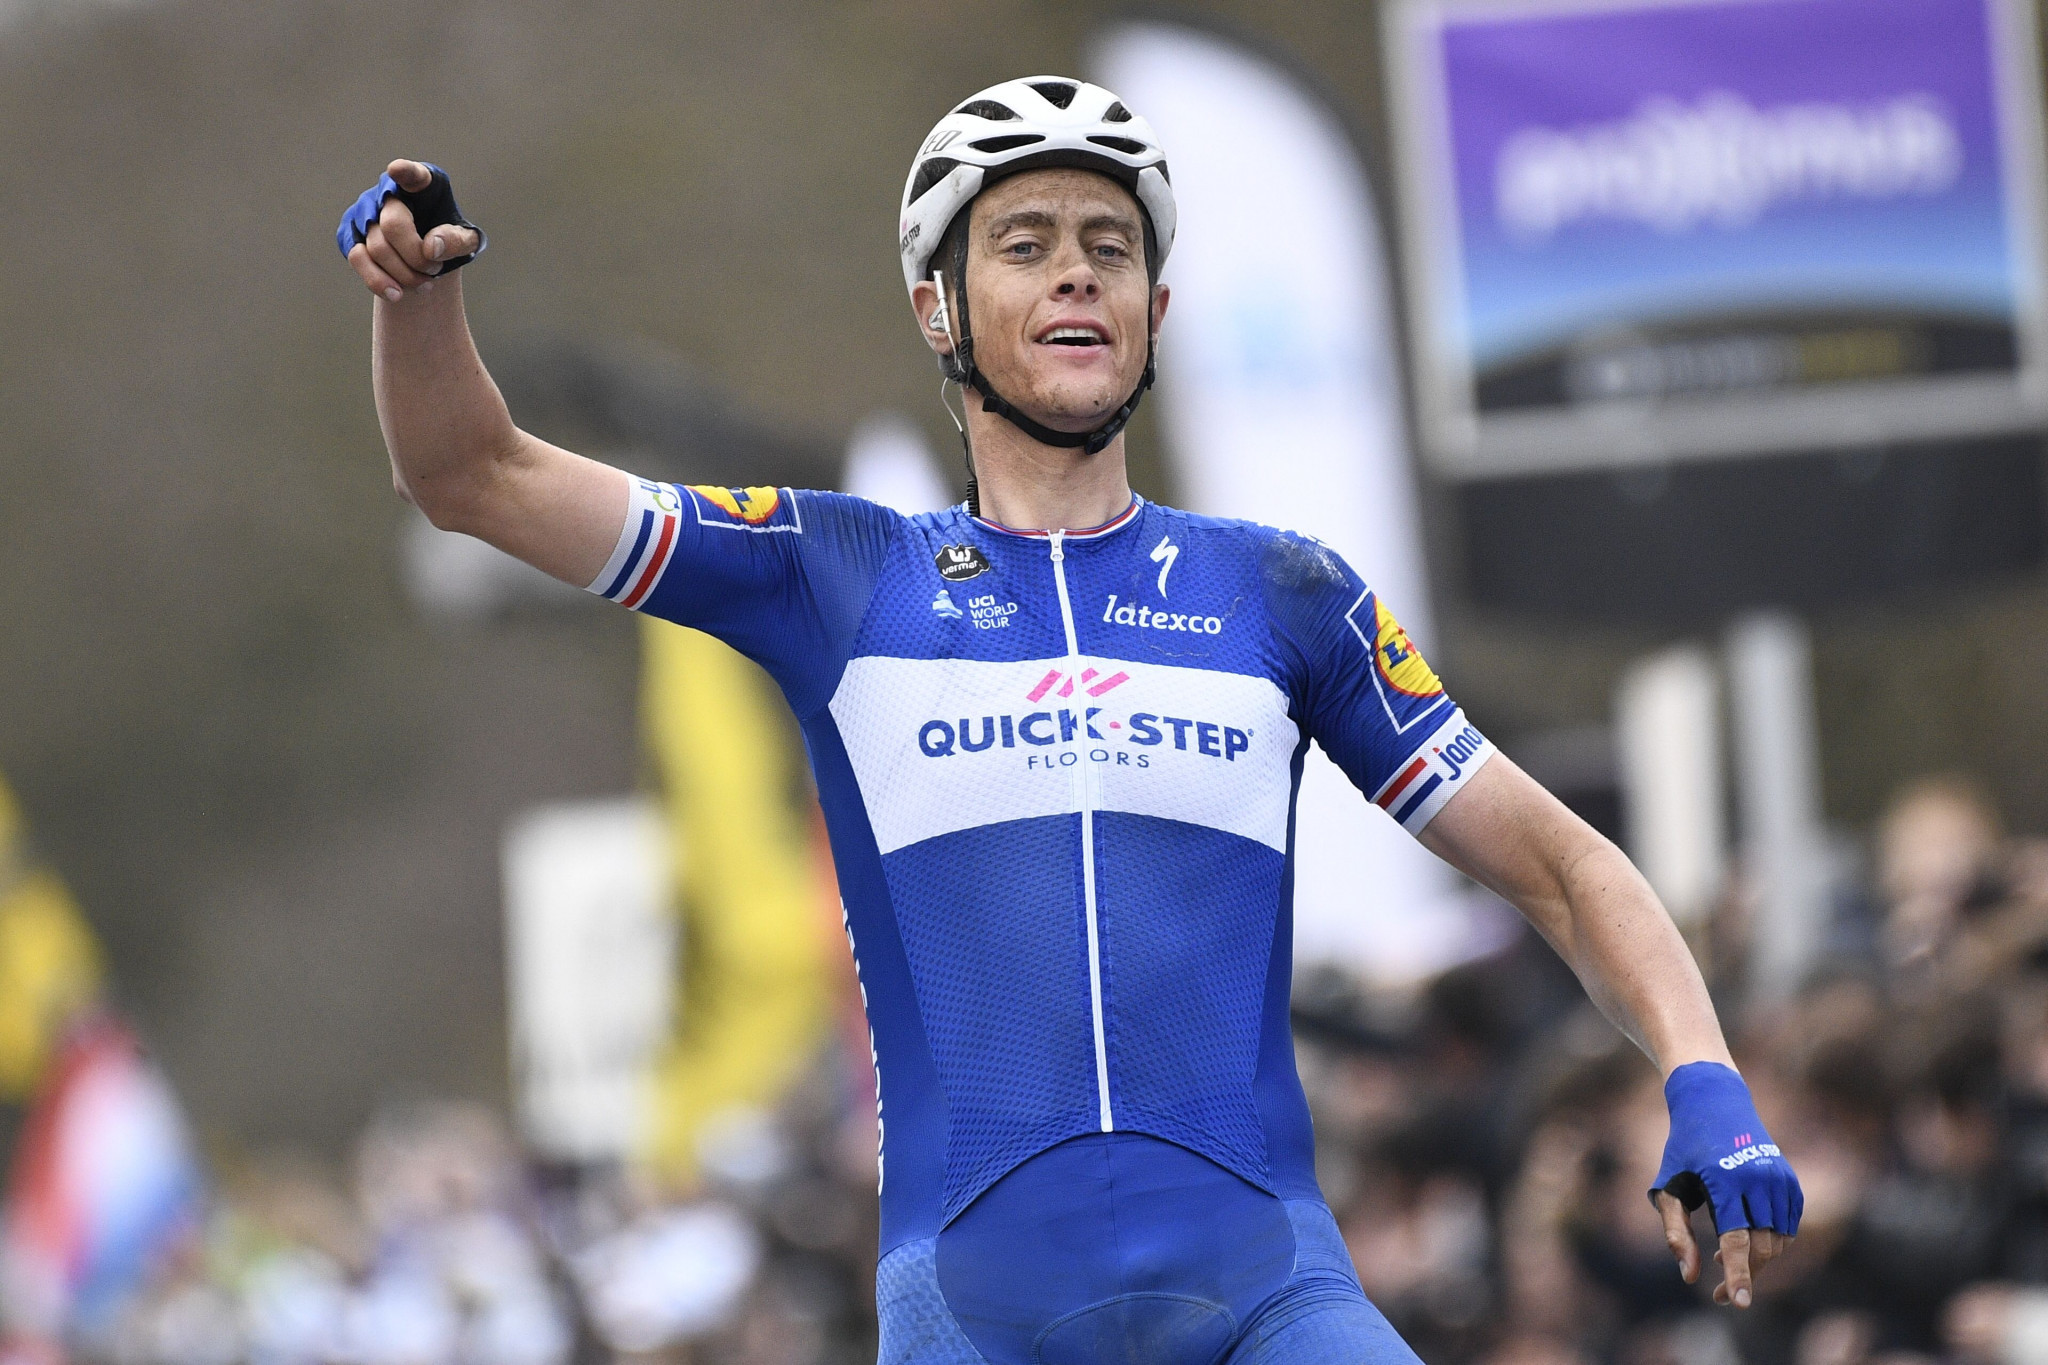 Niki Terpstra became the first Dutch winner of the Tour of Flanders in over 30 years ©